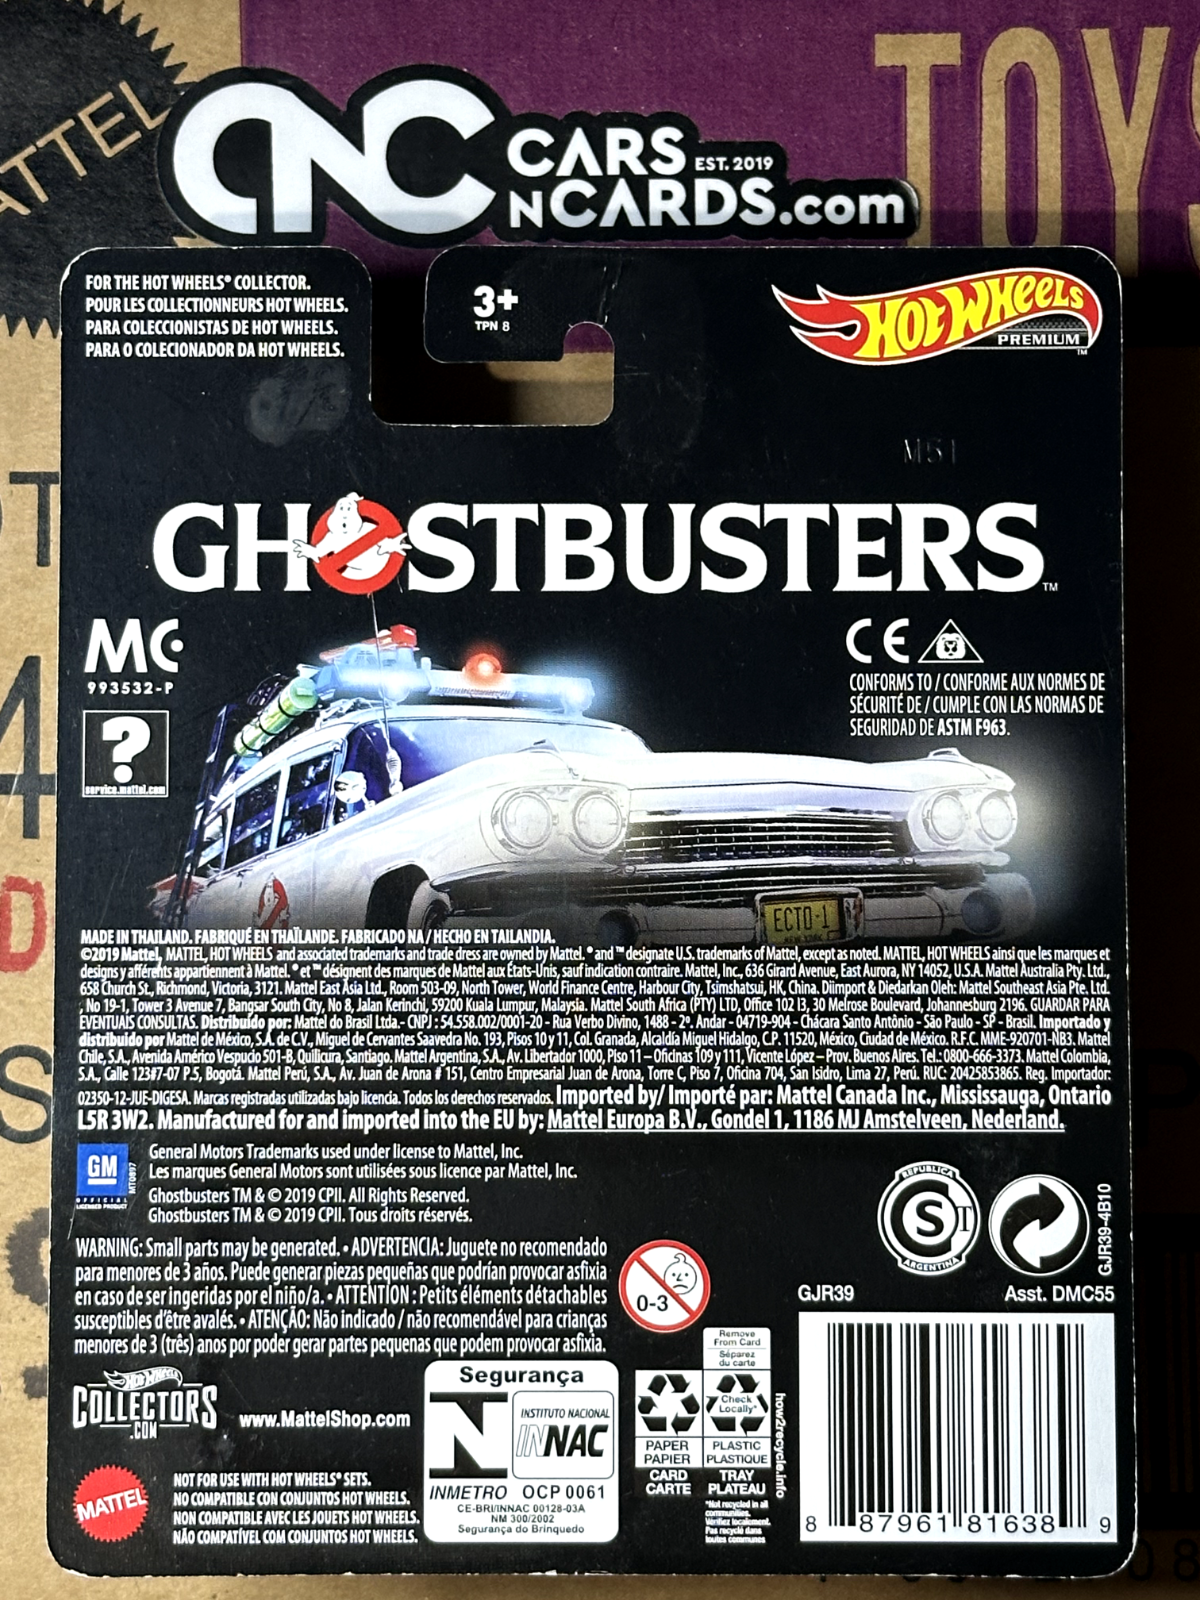 2019 Hot Wheels Premium Real Riders Pop Culture Ghostbusters ECTO-1